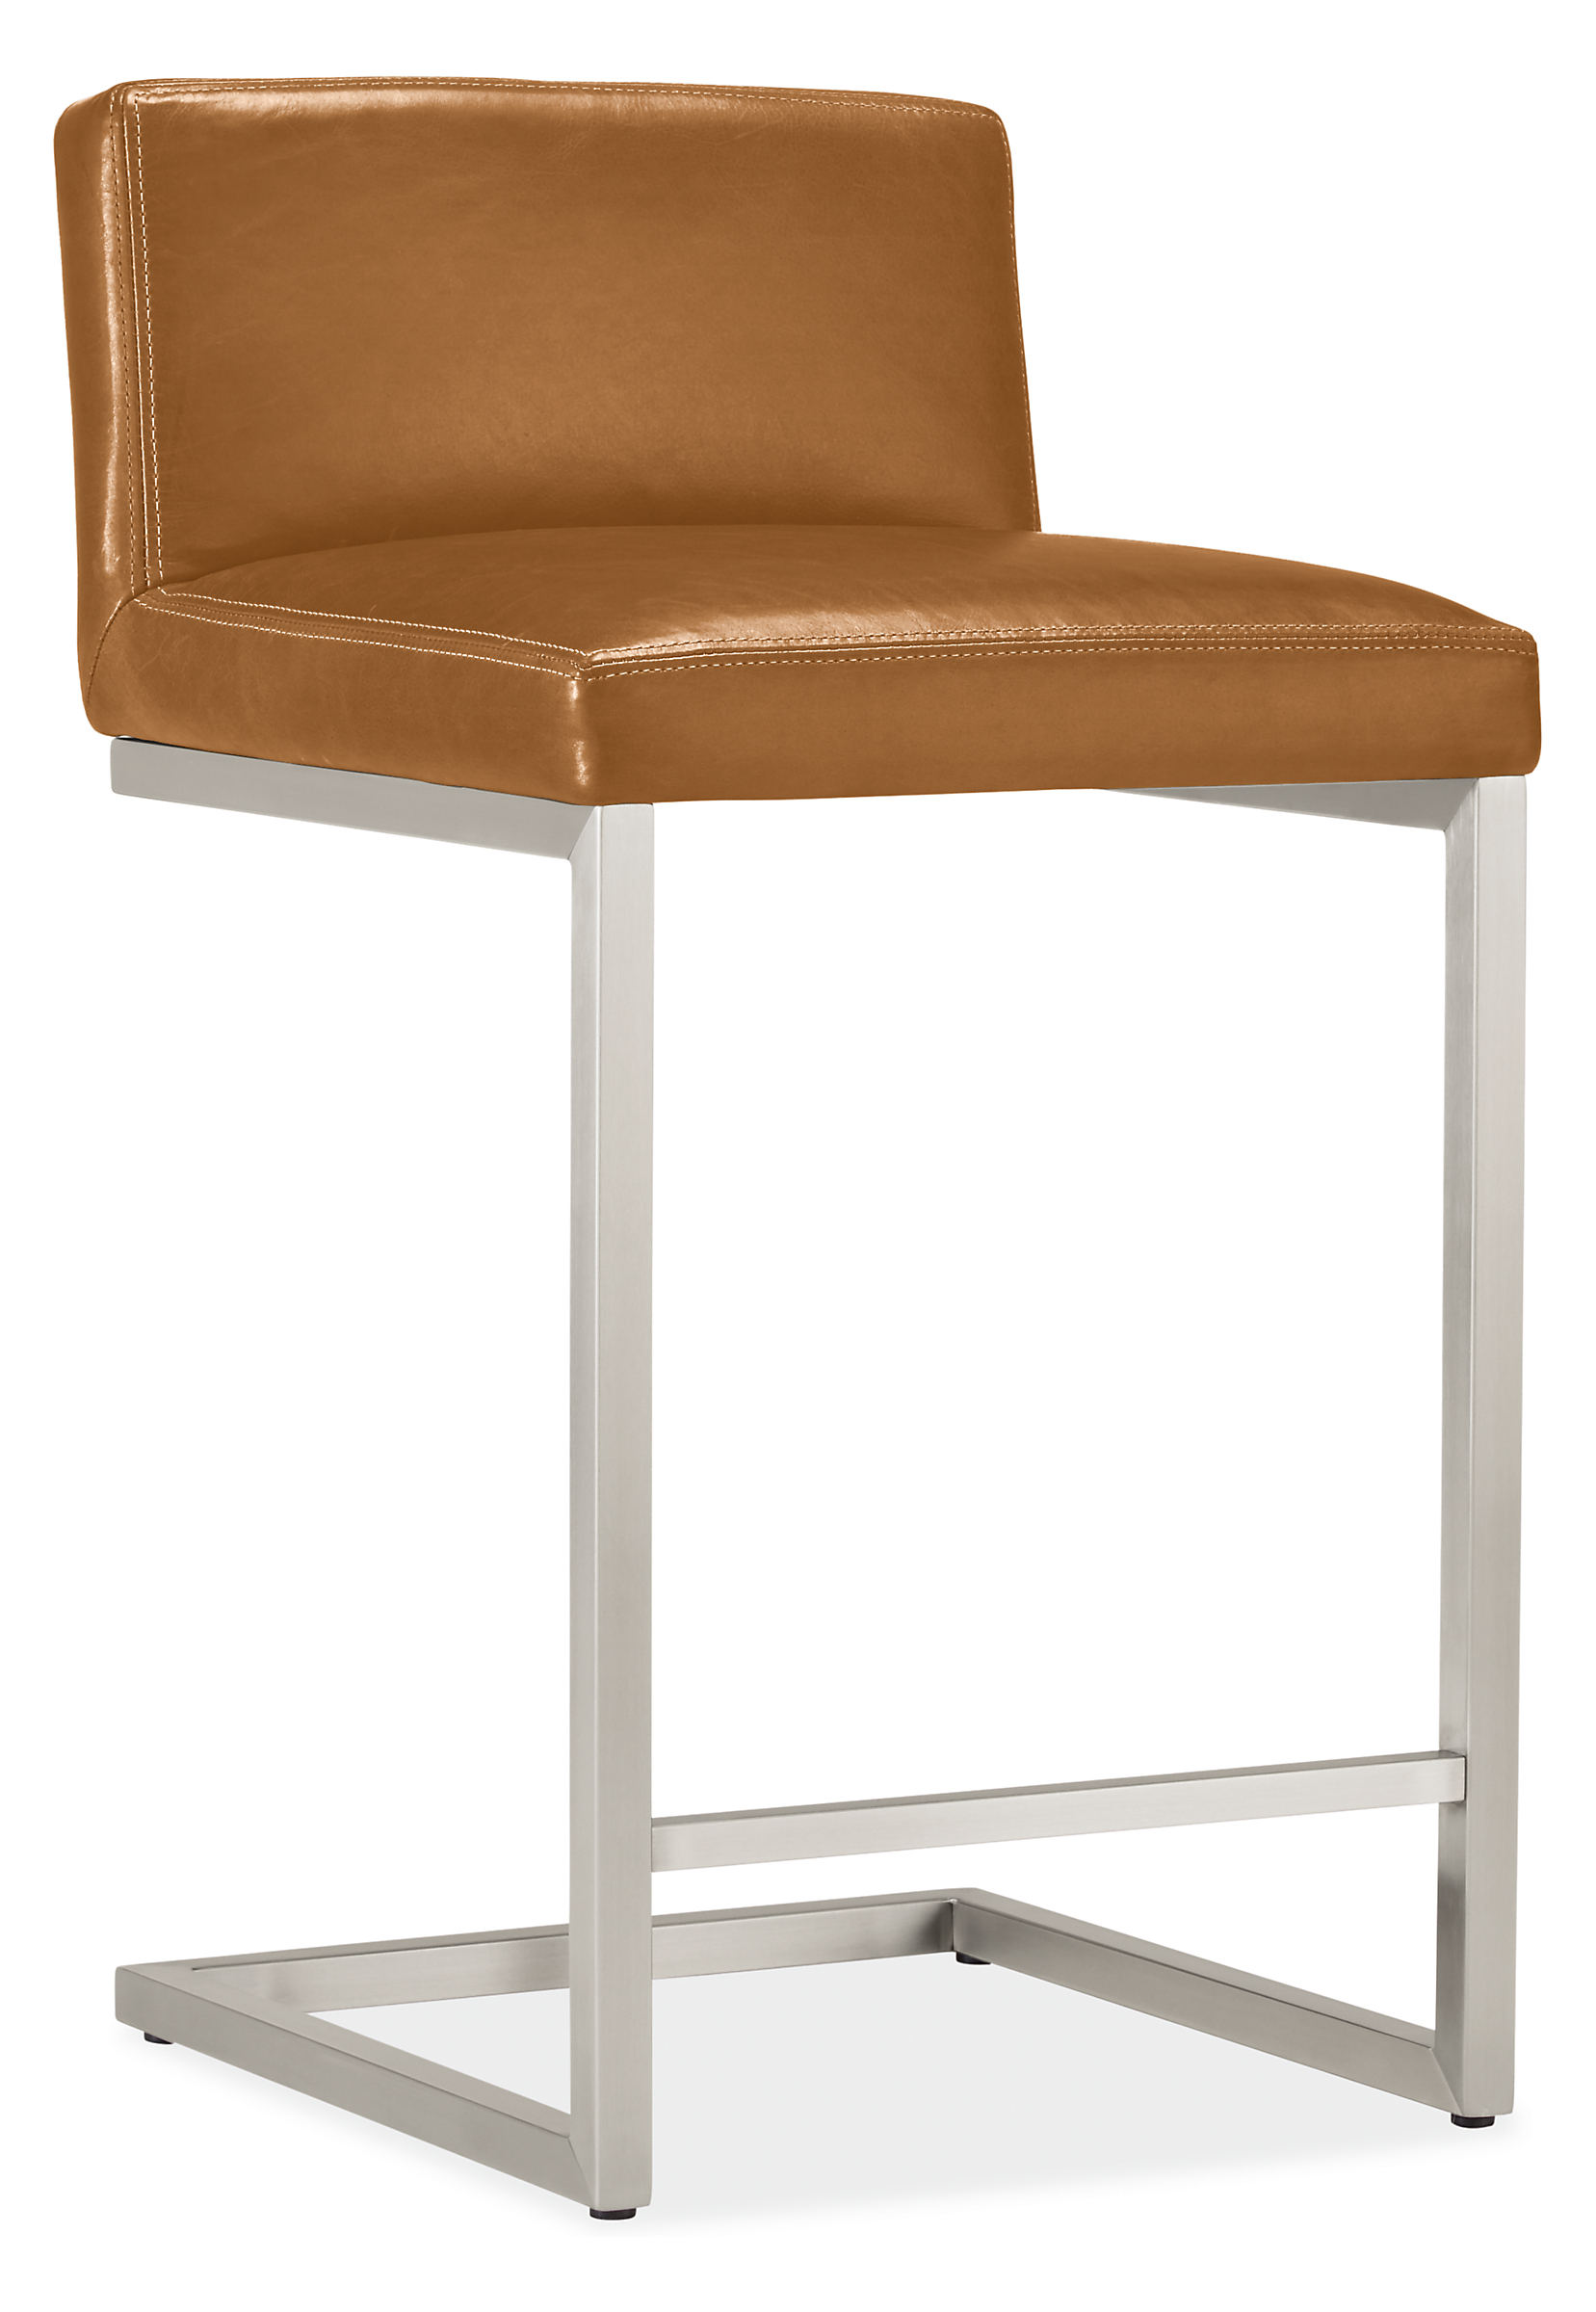 Lira Counter Stool in Portofino Cognac Leather with Stainless Steel